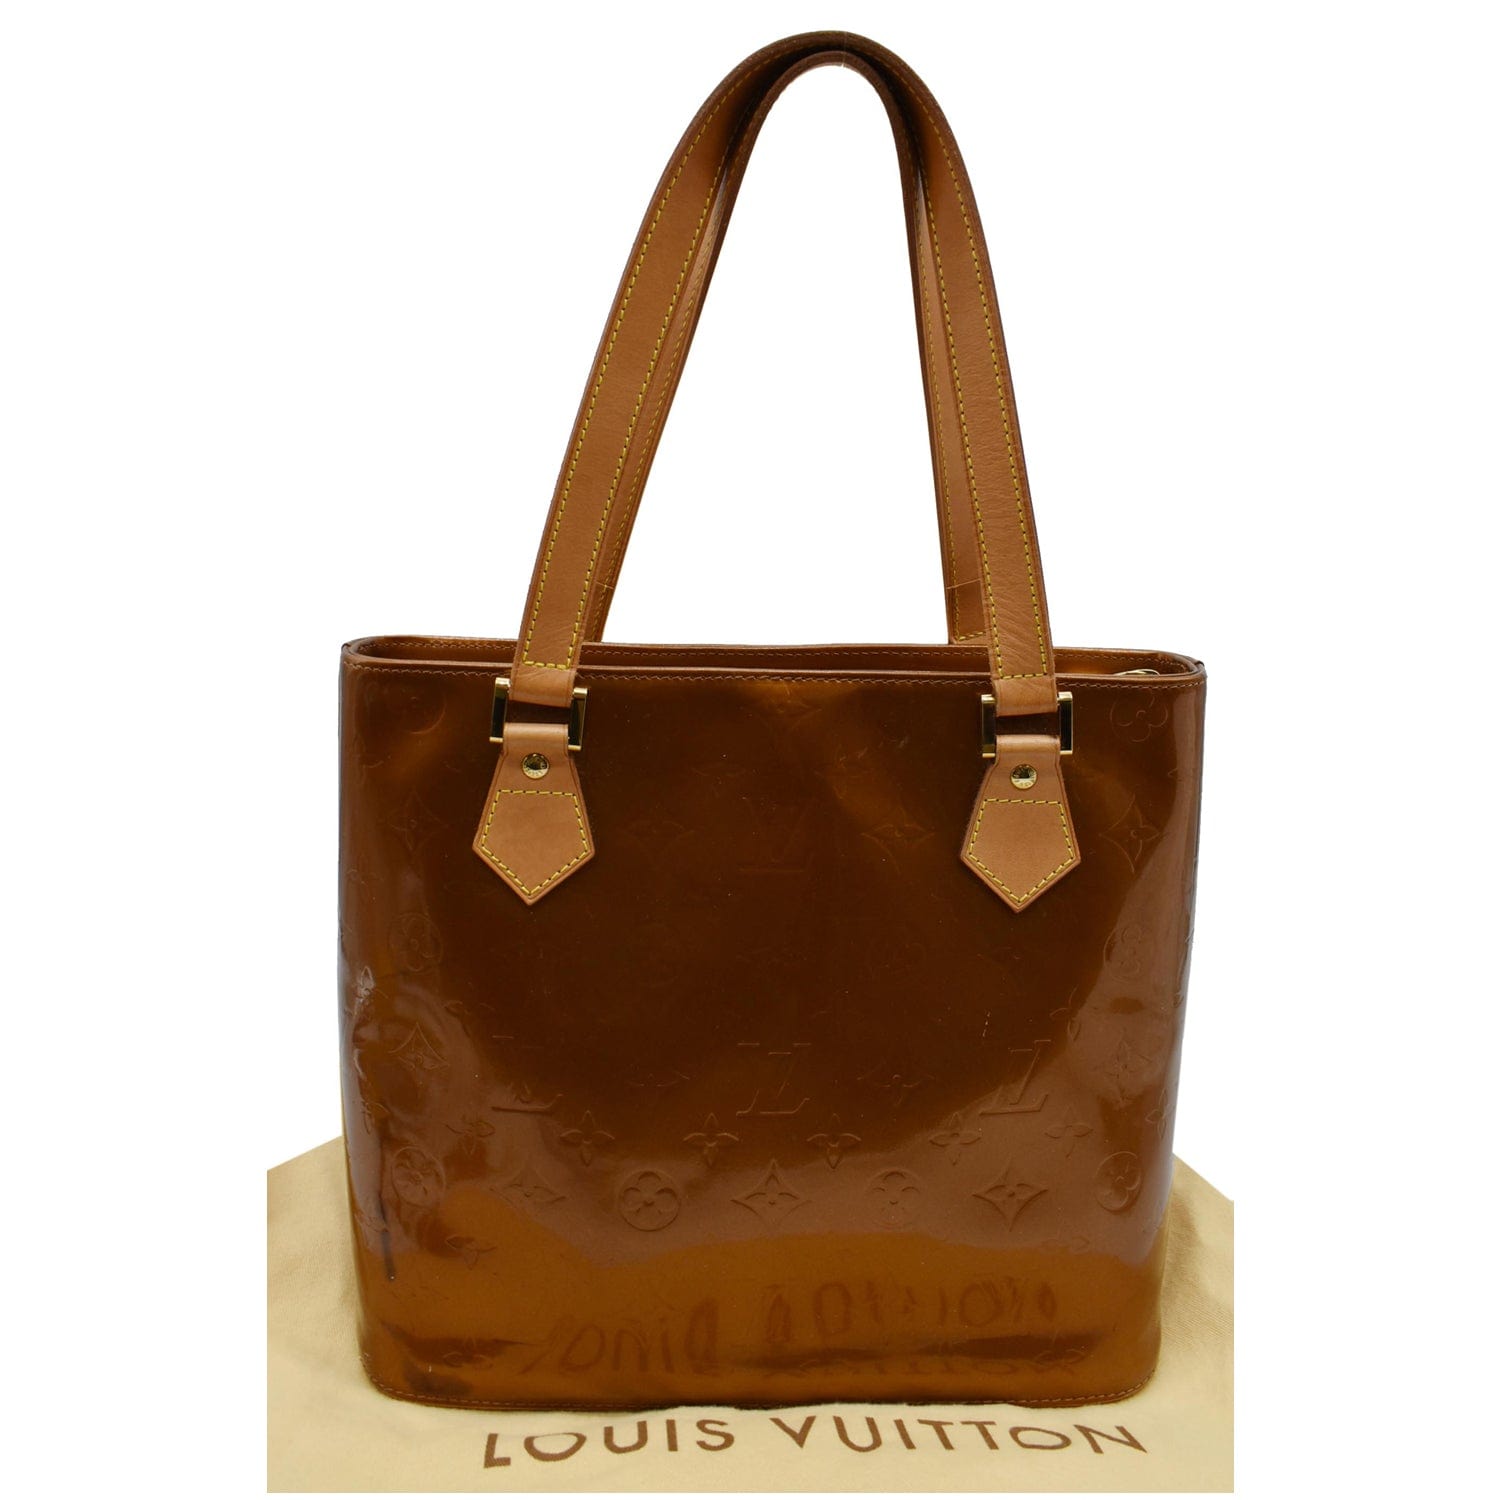 LOUIS VUITTON HOUSTON BRONZE VERNIS BAG, monogram bronze patent leather  with leather handles and brown leather lining, code inside, gold tone  hardware, single zip at the top, 30cm x 26cm H x